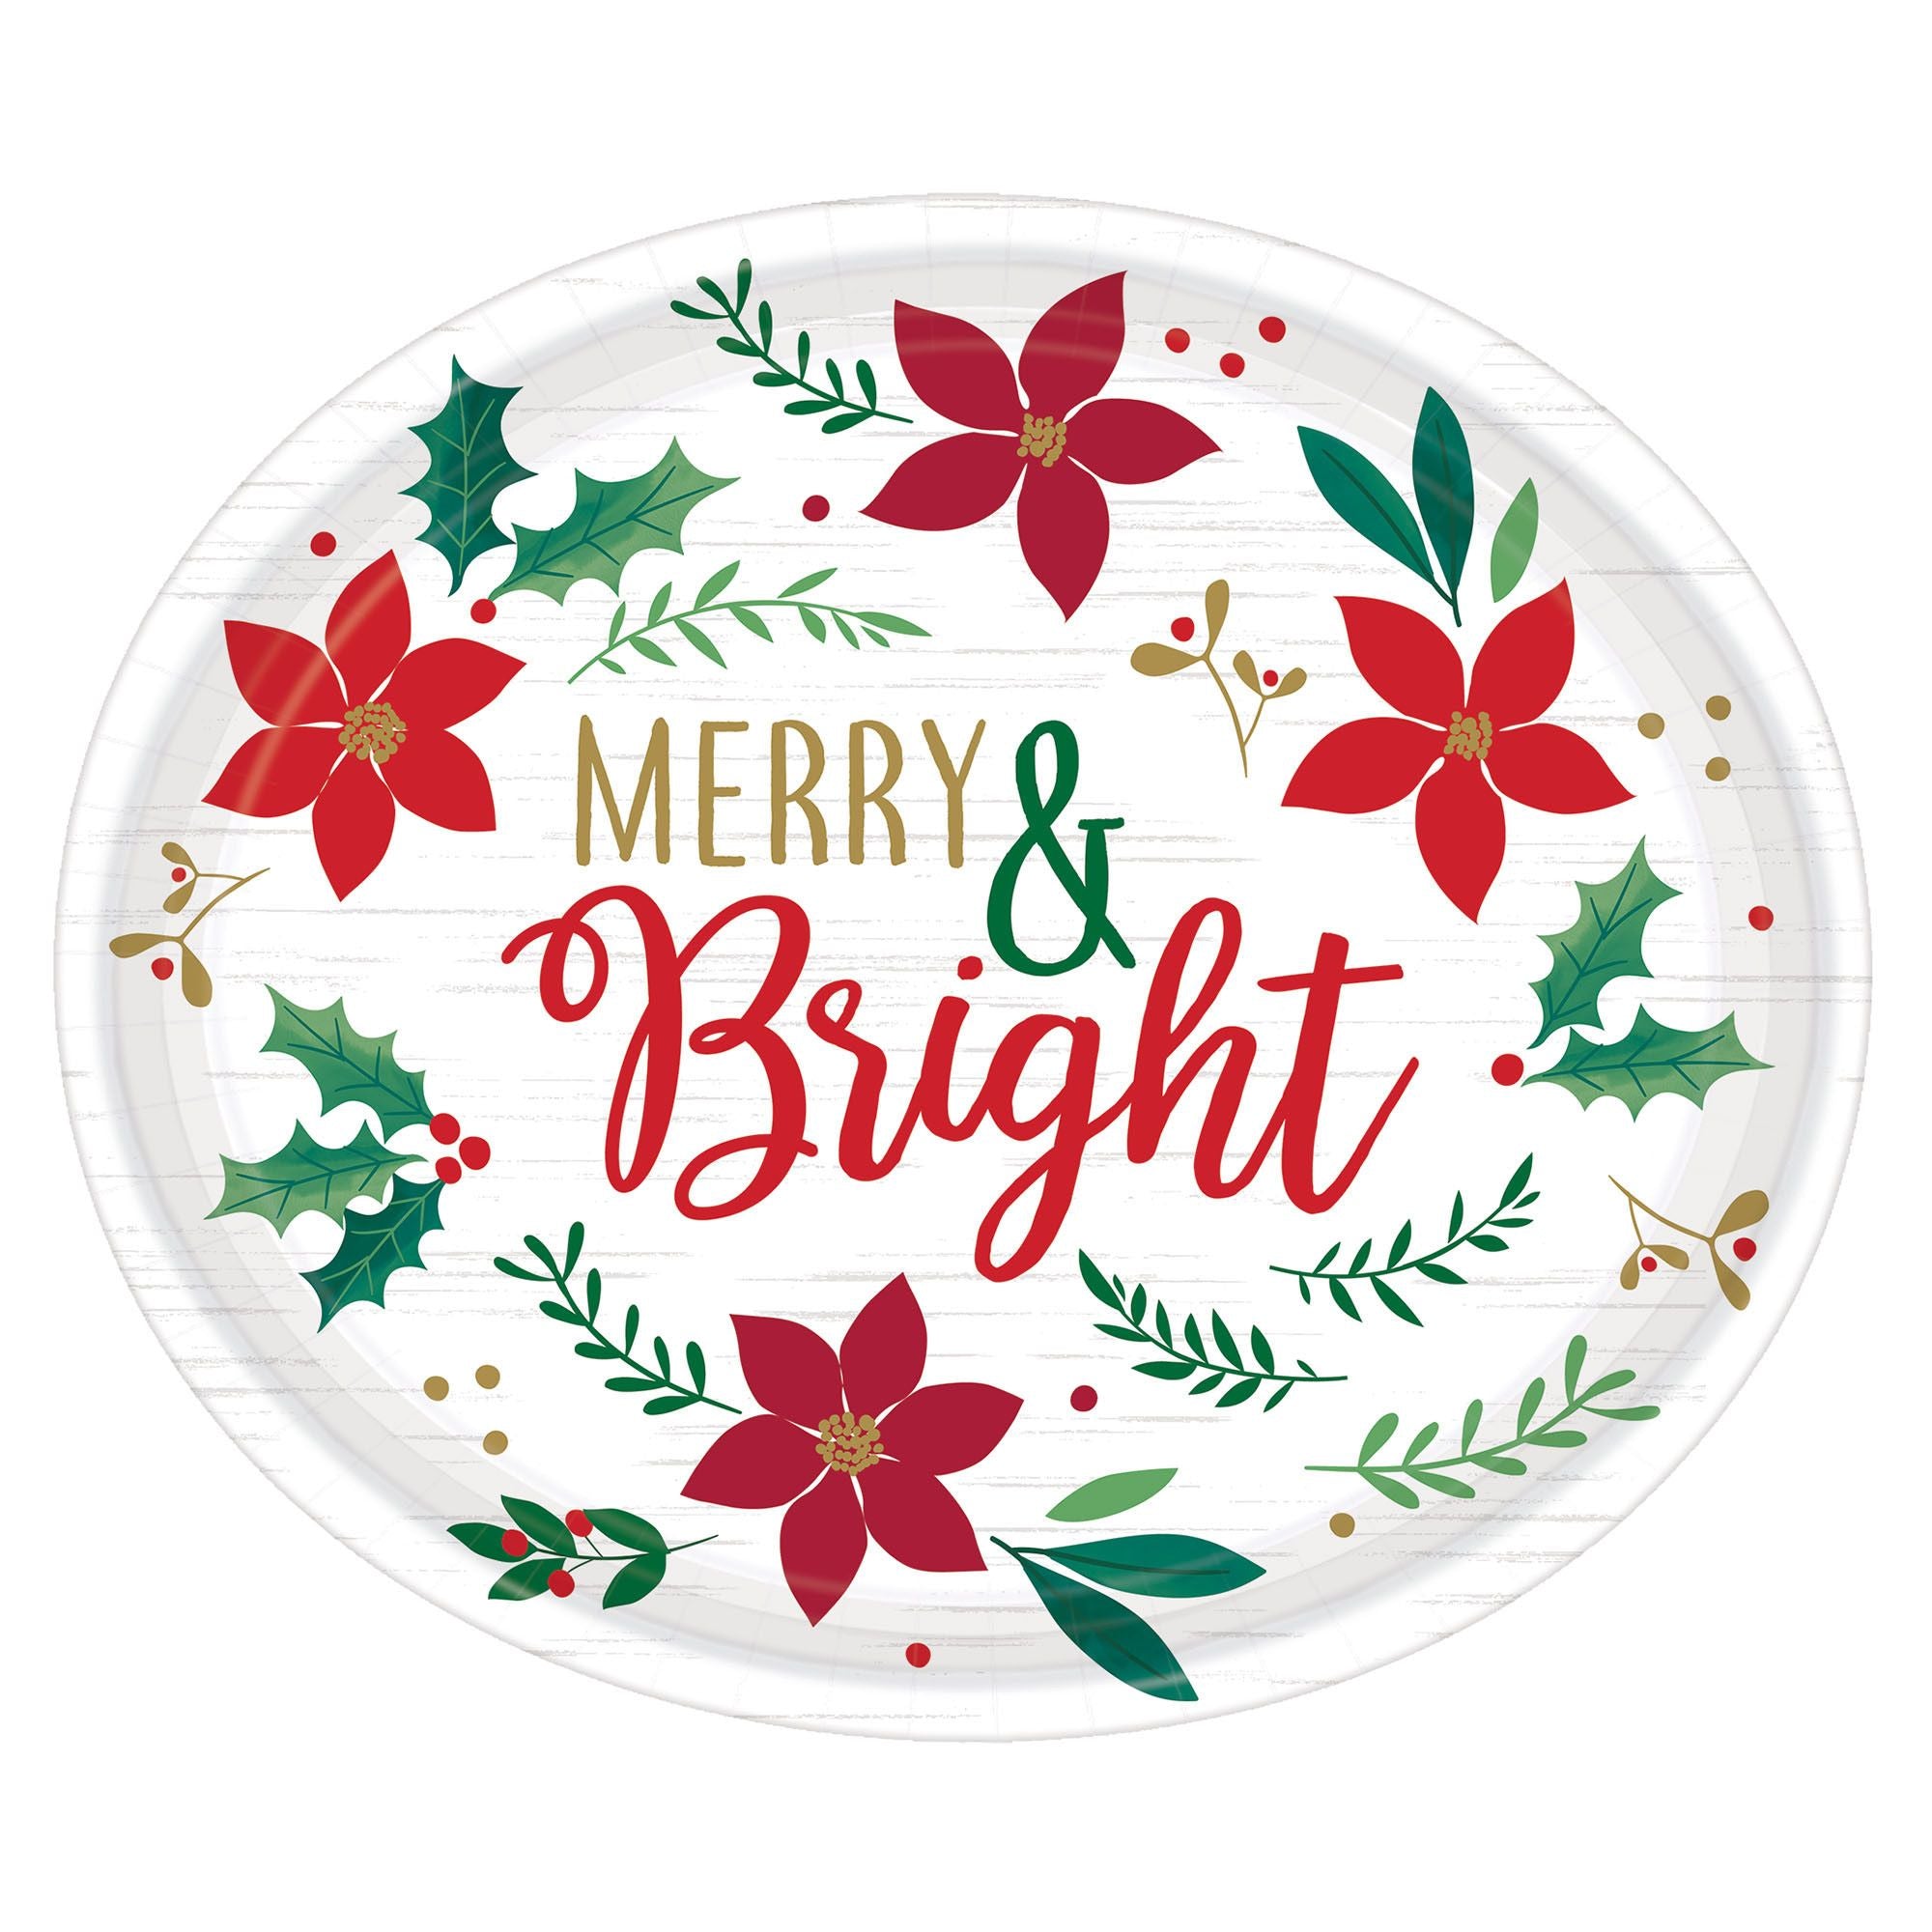 Christmas Wishes Oval Plates, 12